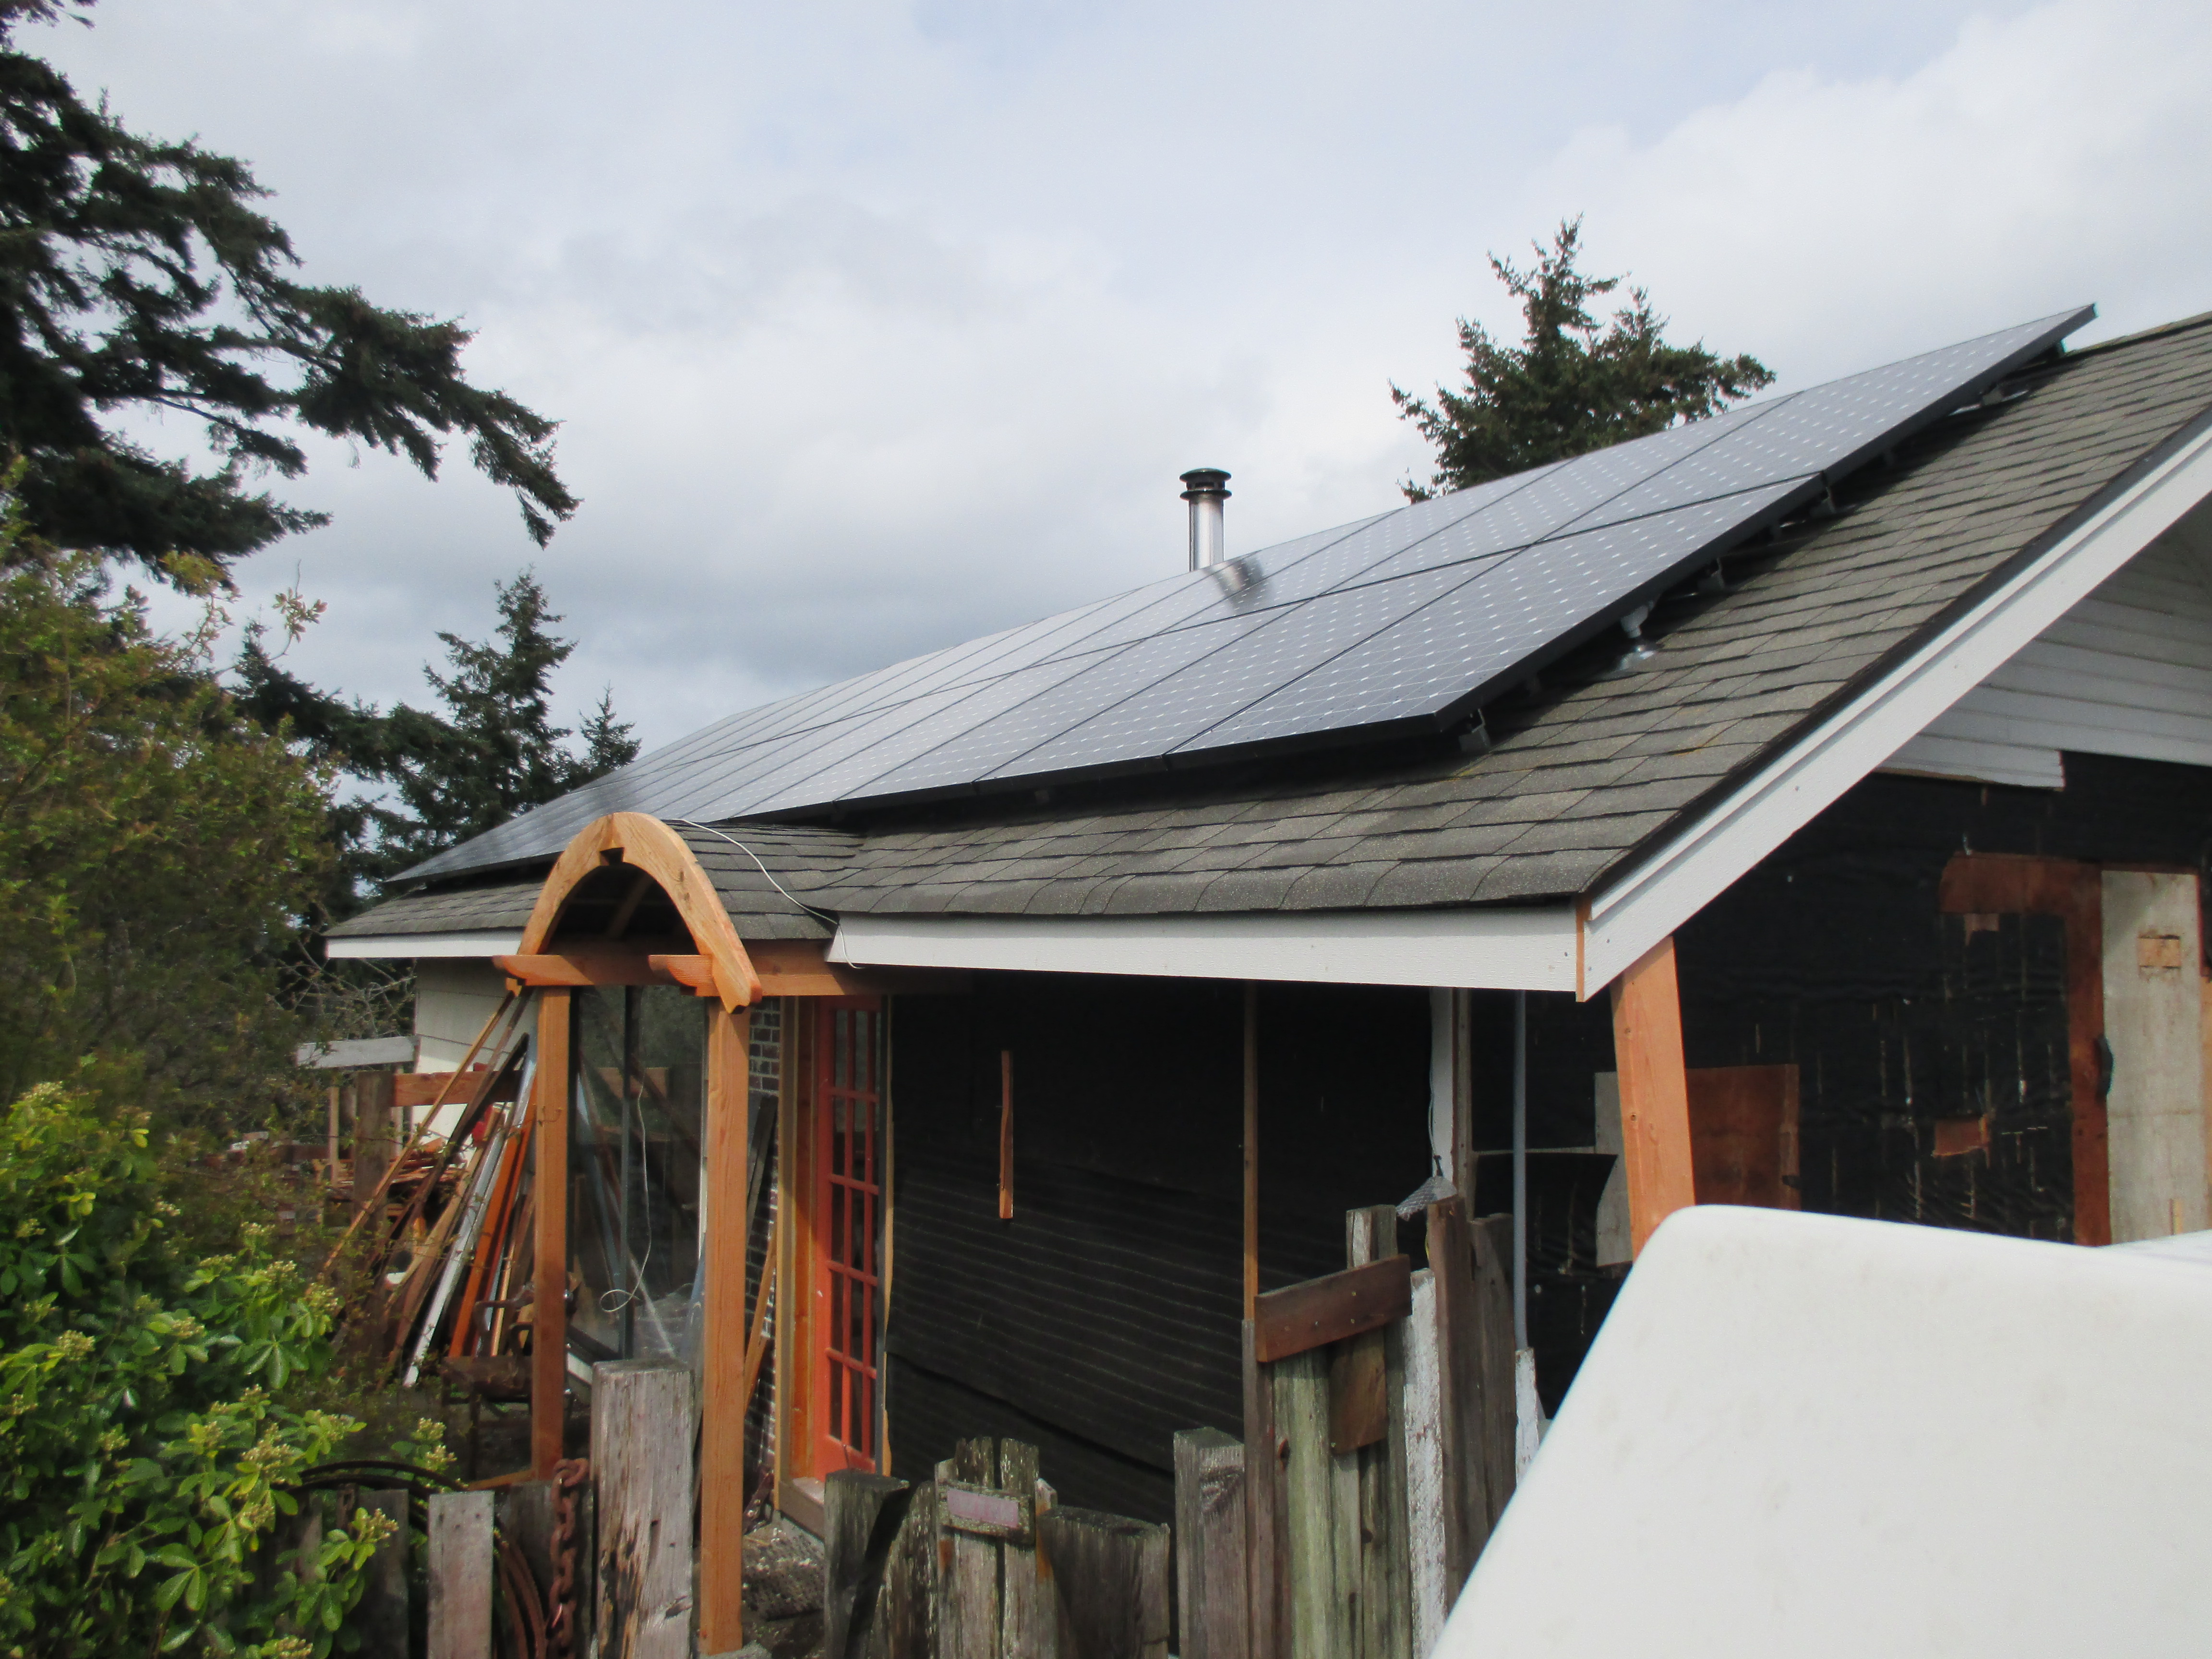 Rome Residence, 7.19 KW, Port Townsend, 2017